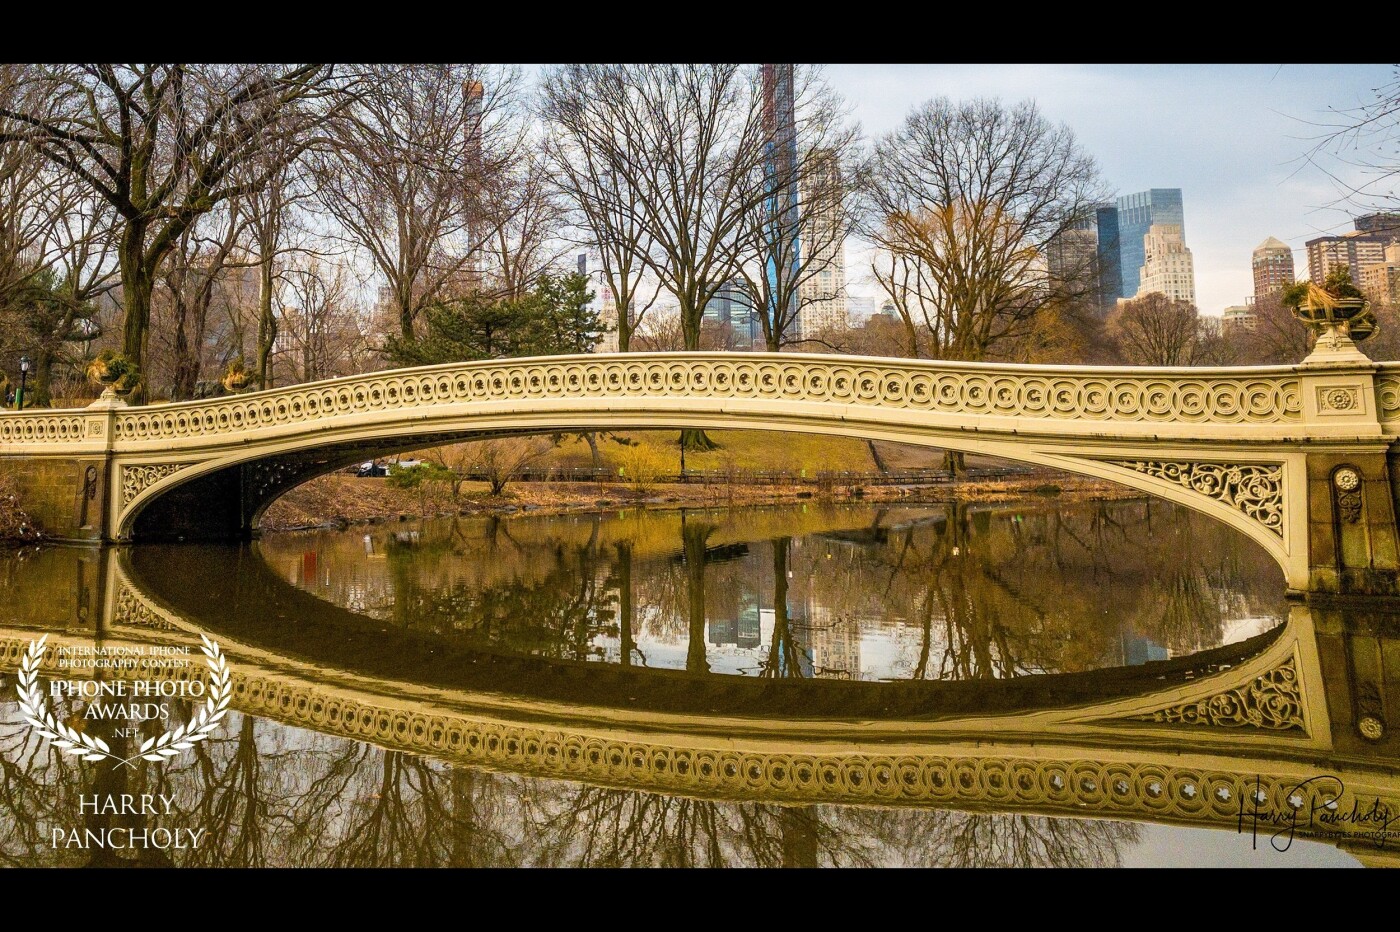 Shot this on a Friday morning at New York Central Park. There weren't many people as it was a cloudy Friday morning and was about to grab the shot without any people walking by.